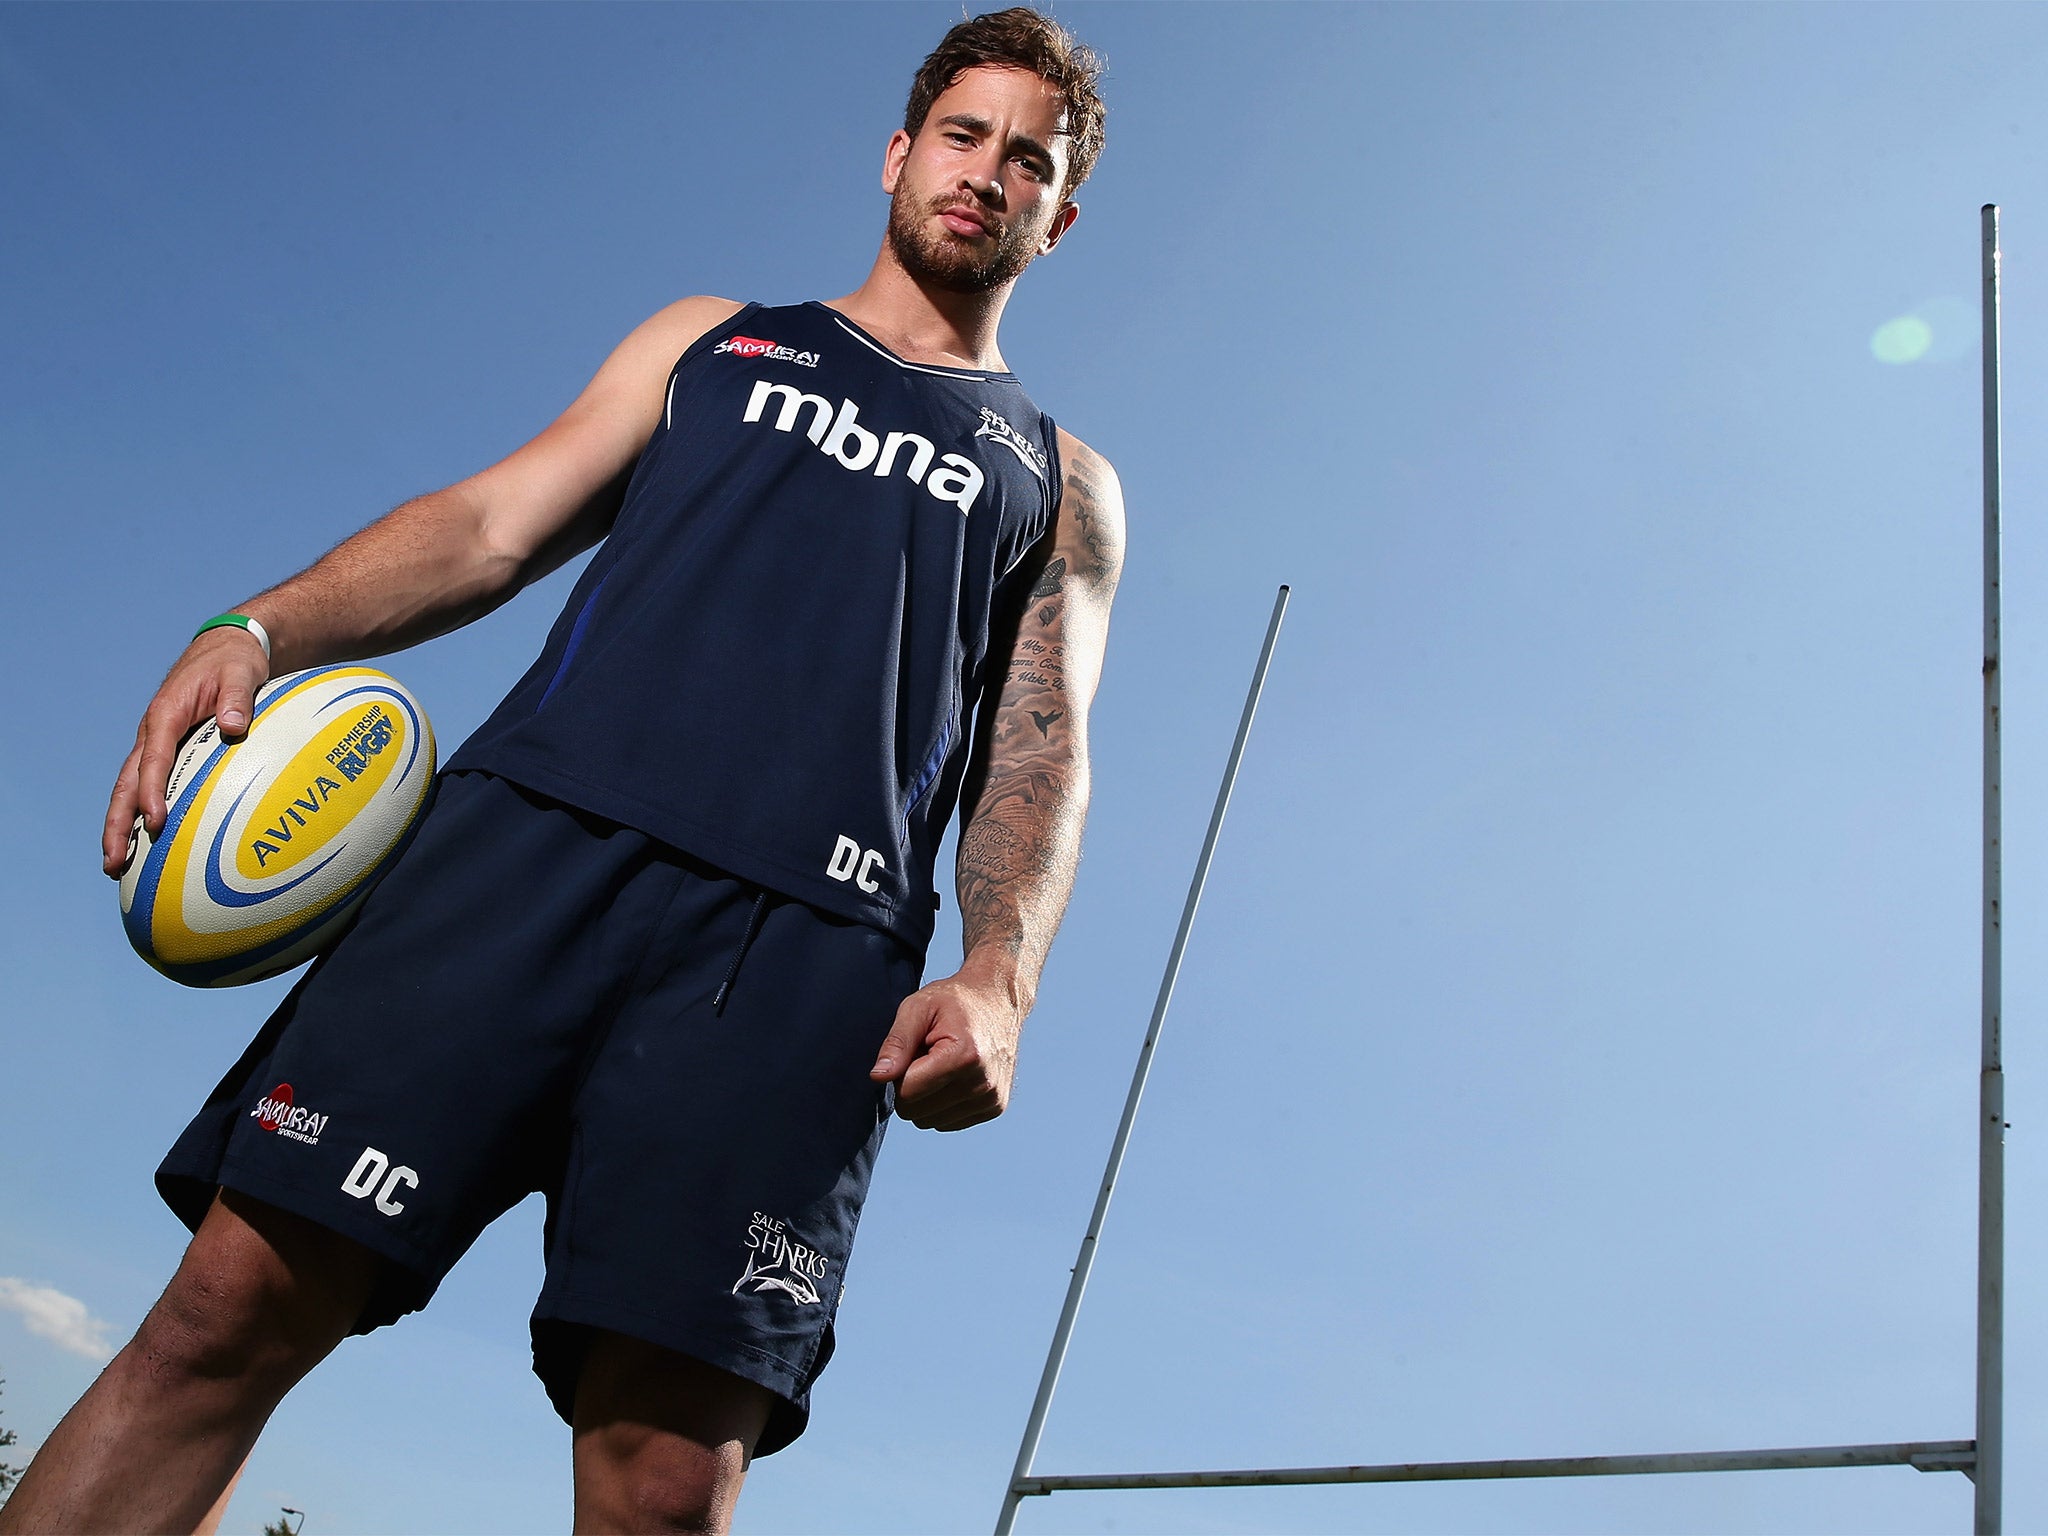 Danny Cipriani feels his attacking skills have improved but making the World Cup will be hard